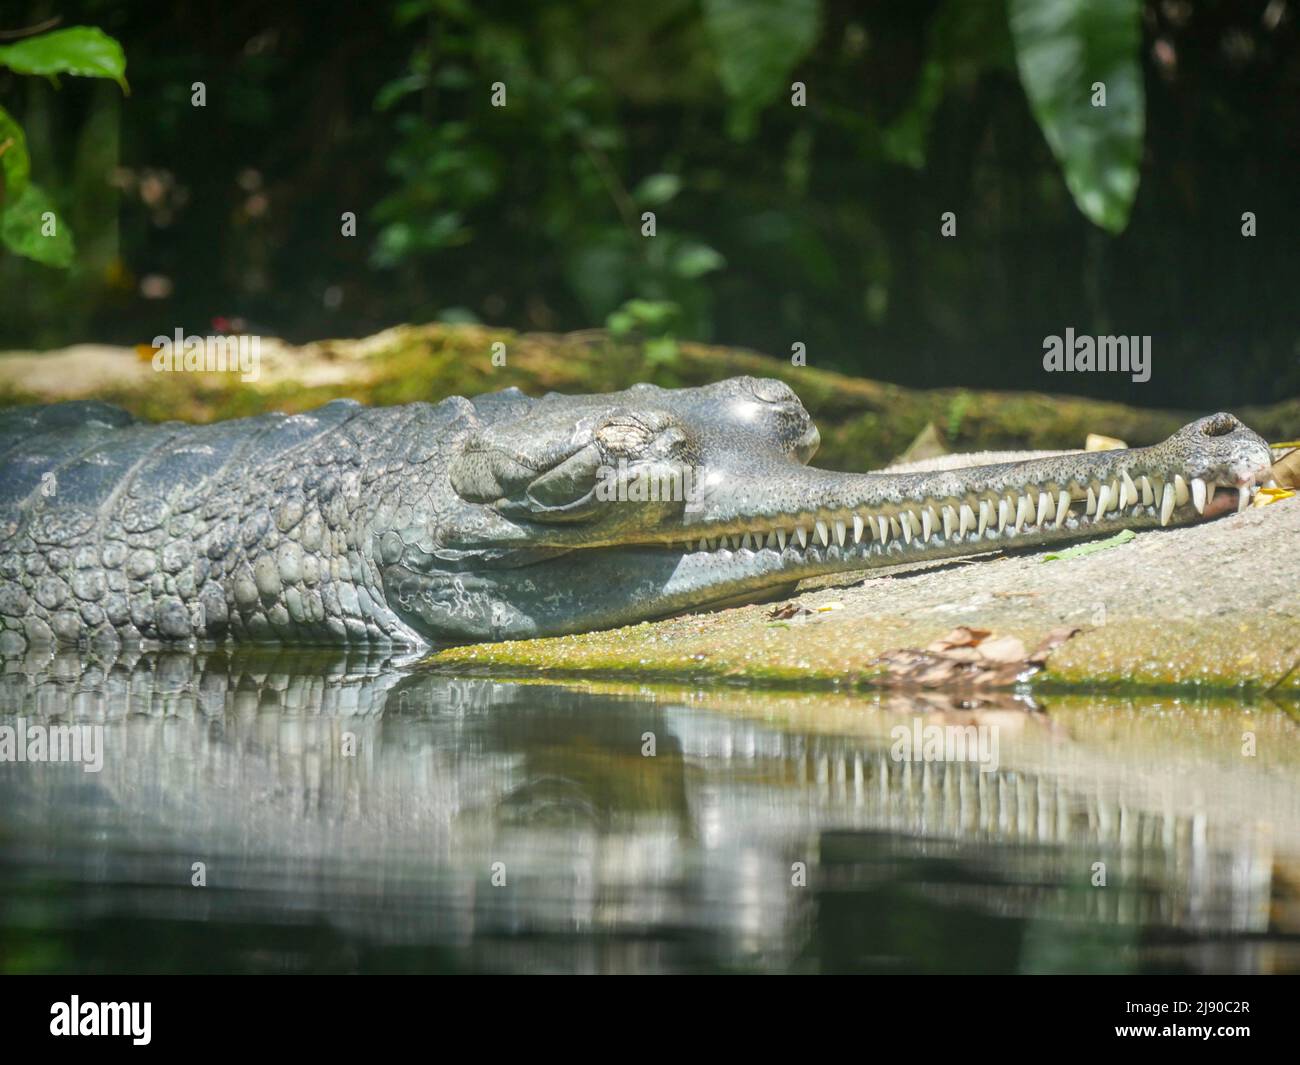 Gharial also known as gavial or fish-eating crocodile resting in water Stock Photo